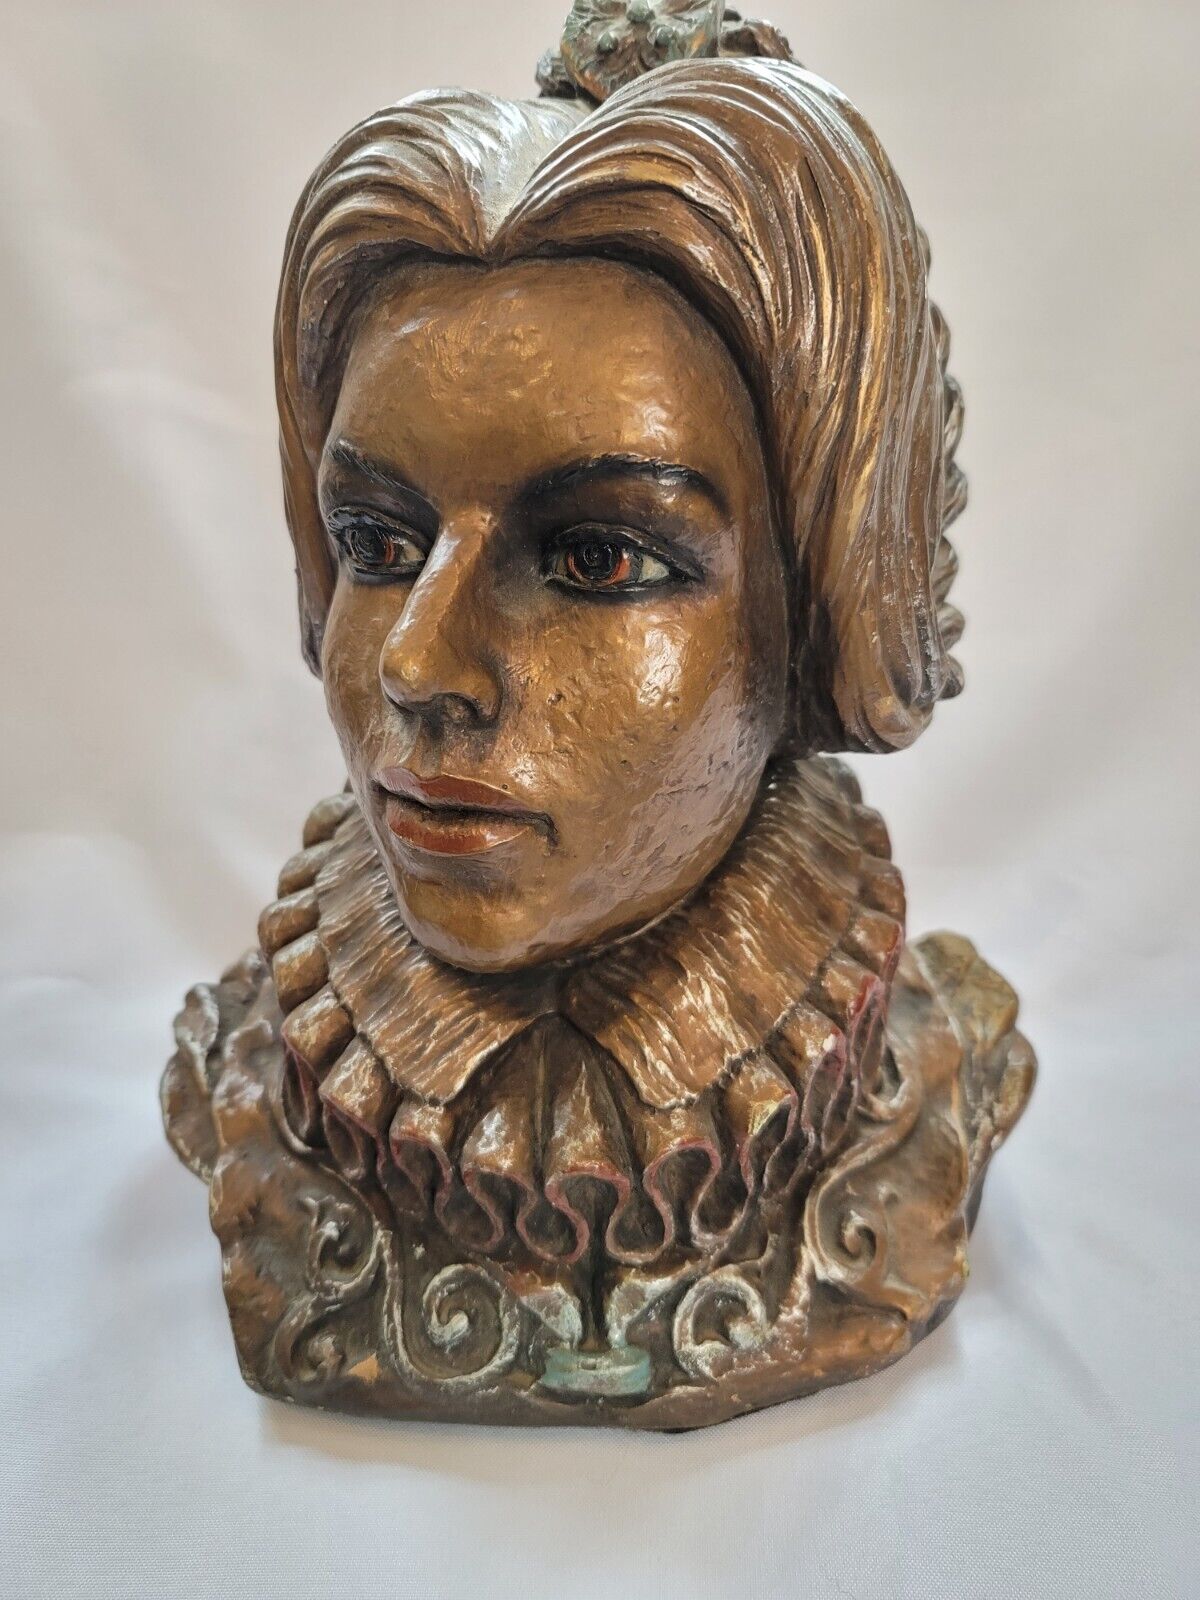 *Spanish Royal bust - Marwal chalkware in excellent cond. 8 lbs 13\